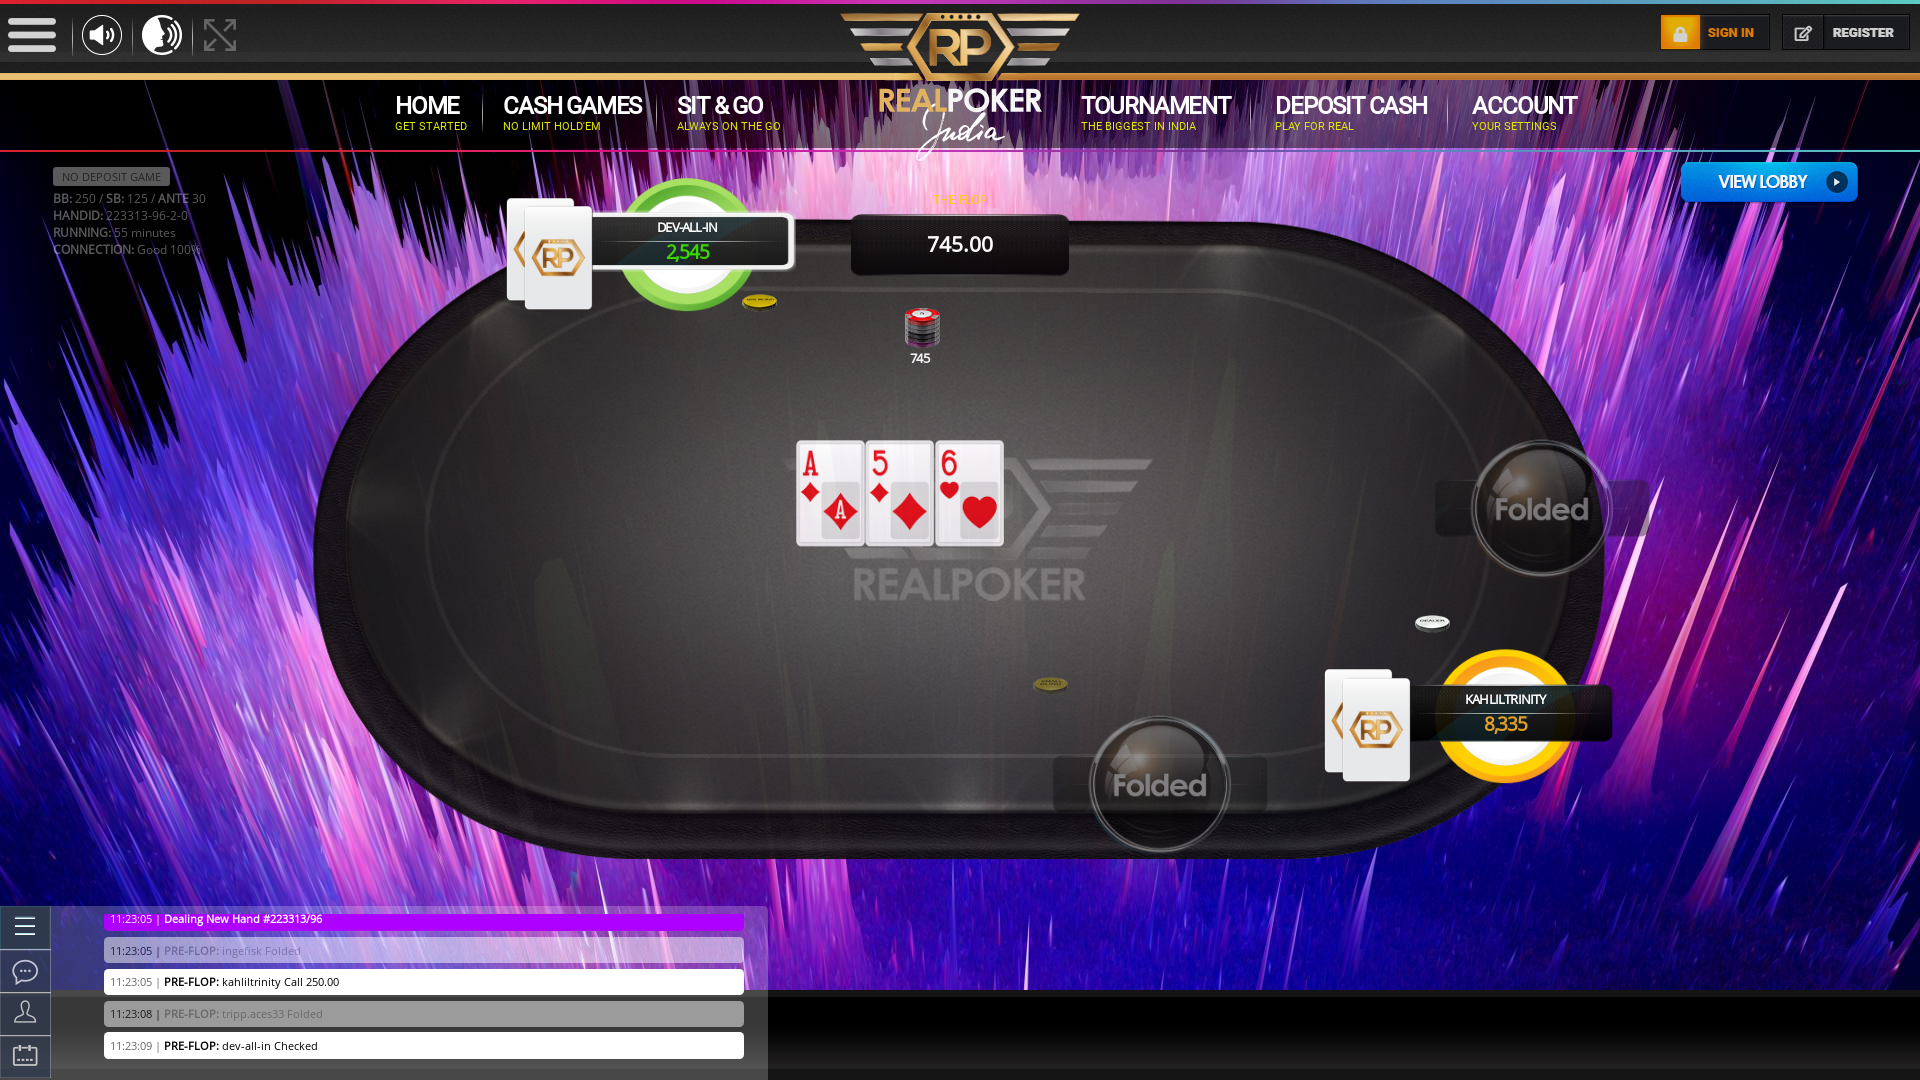 Real poker on a 10 player table in the 54th minute of the game